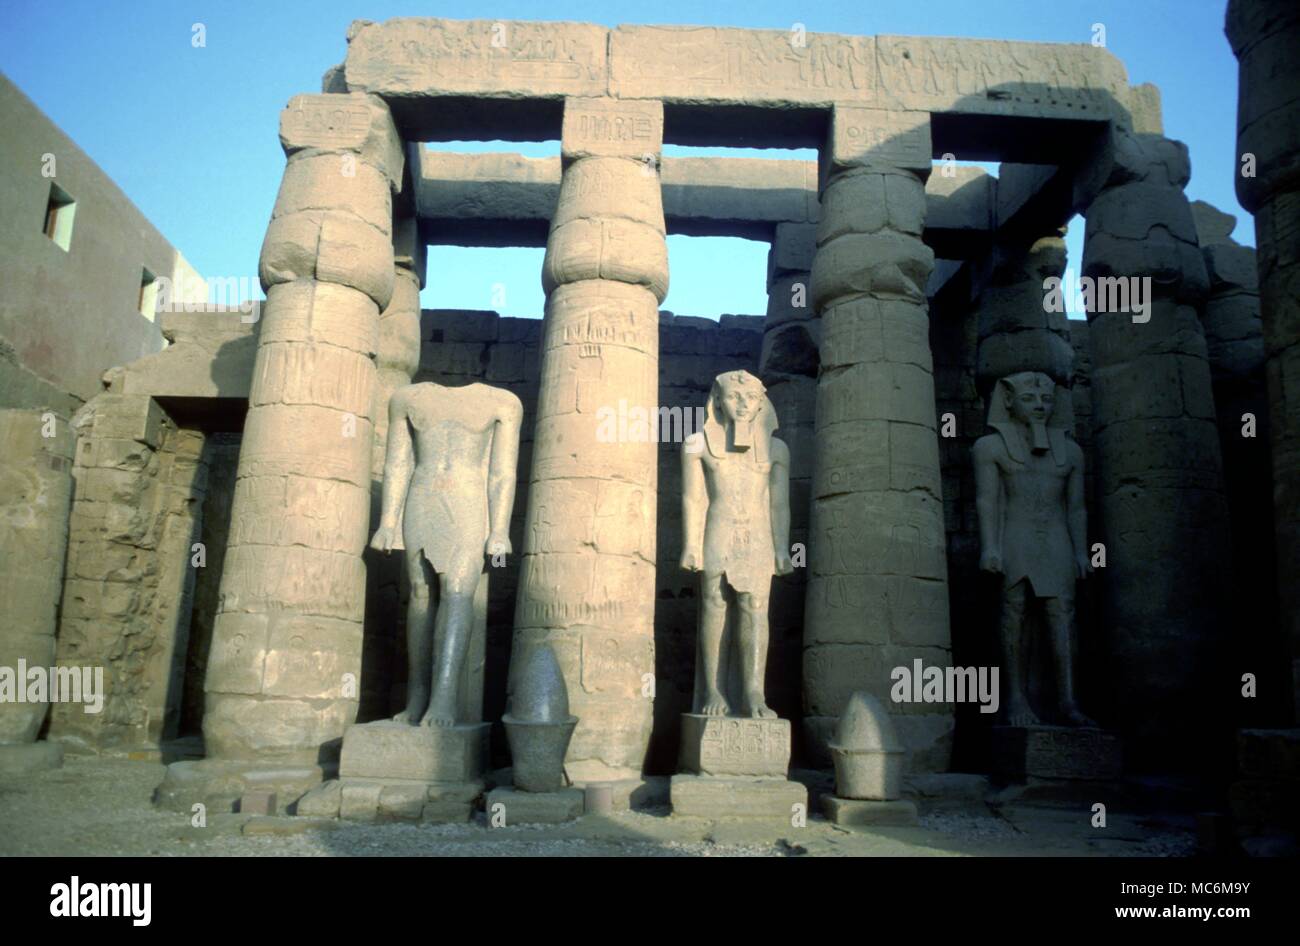 Egypt Luxor Courtyard in the Temple of Luxor with the remains of colossal statues of the Pharoah Rameses II Stock Photo